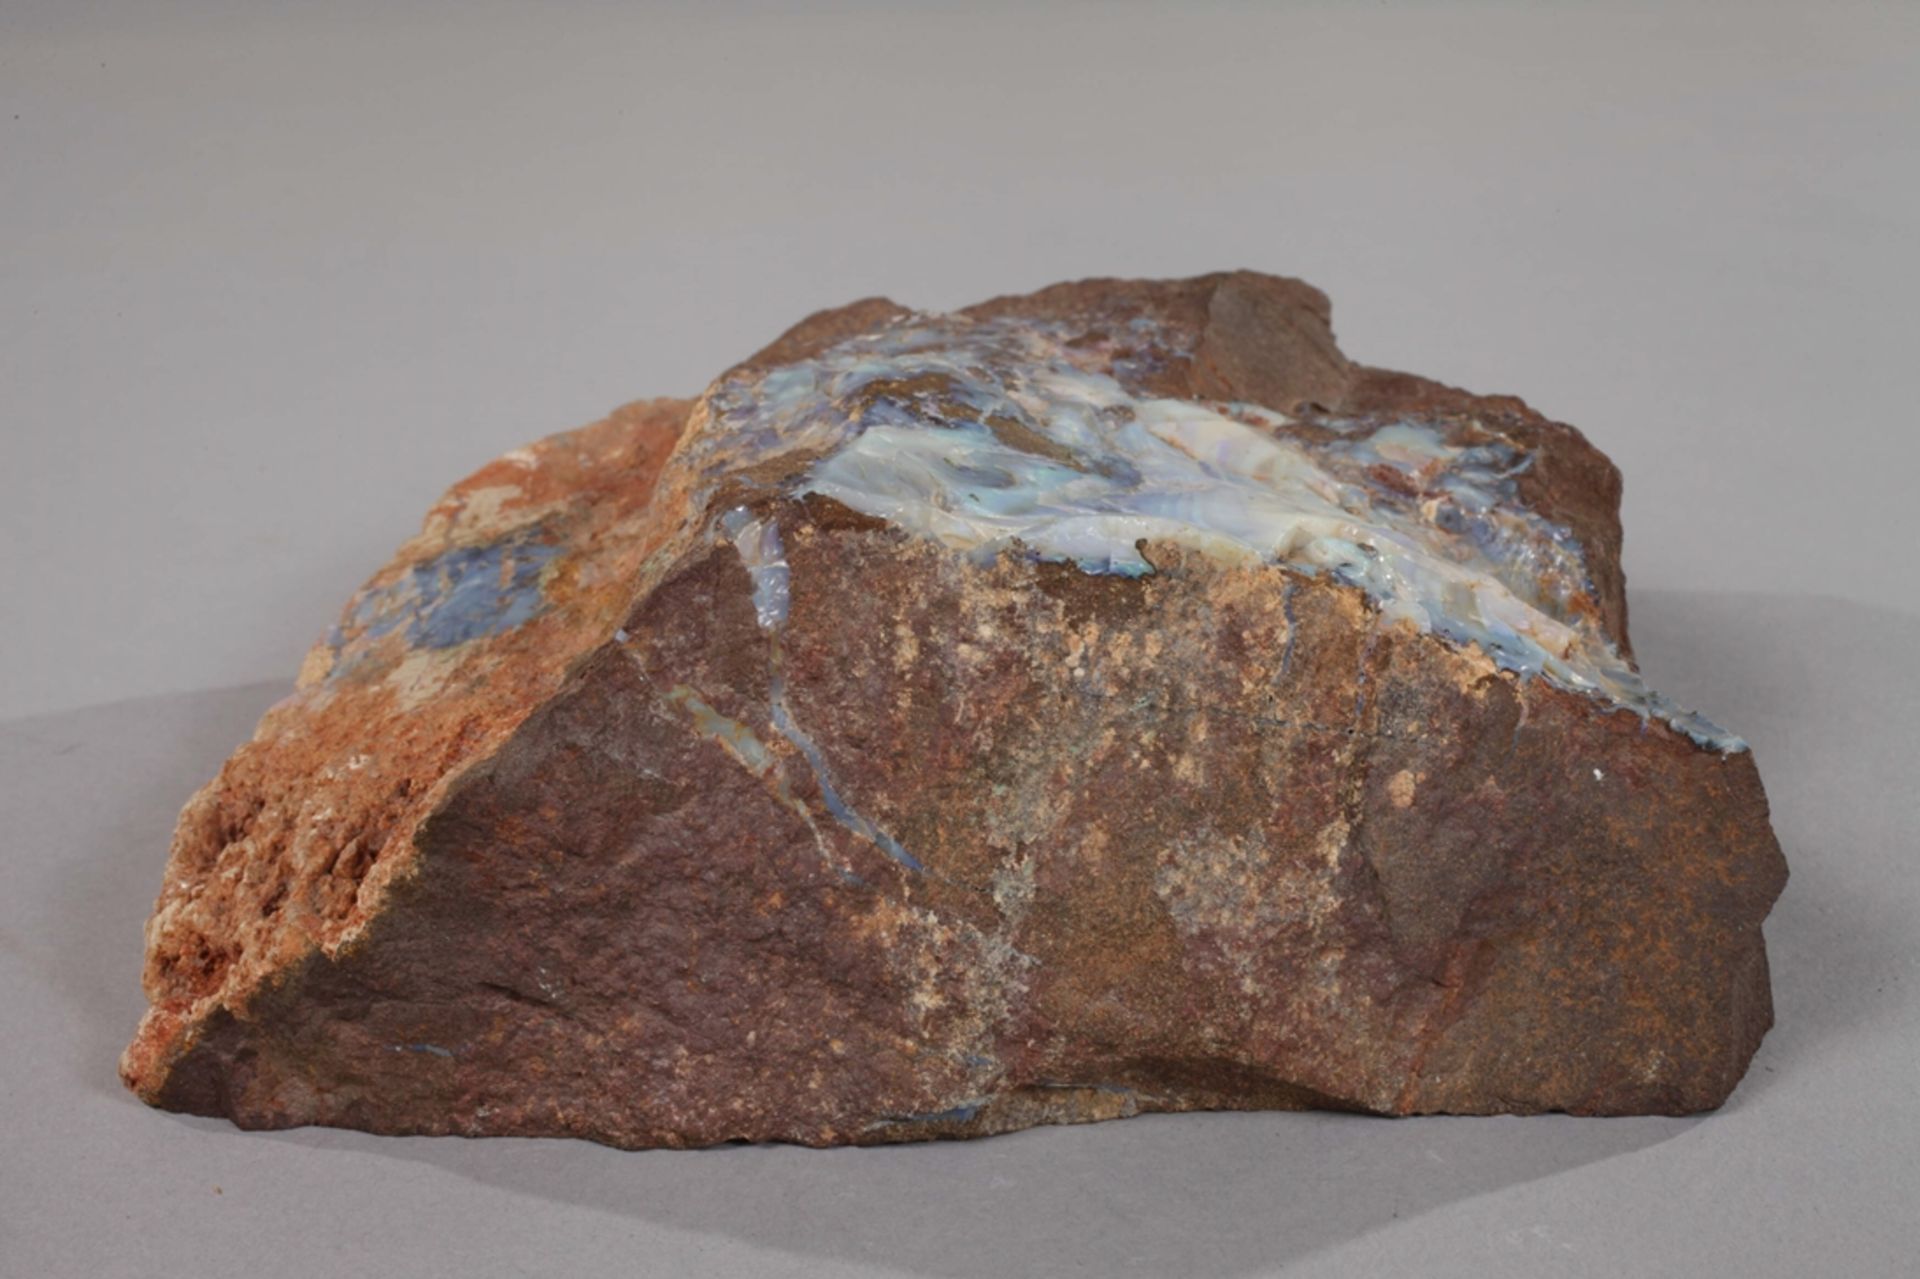 Edelopal in mother rock - Image 5 of 5